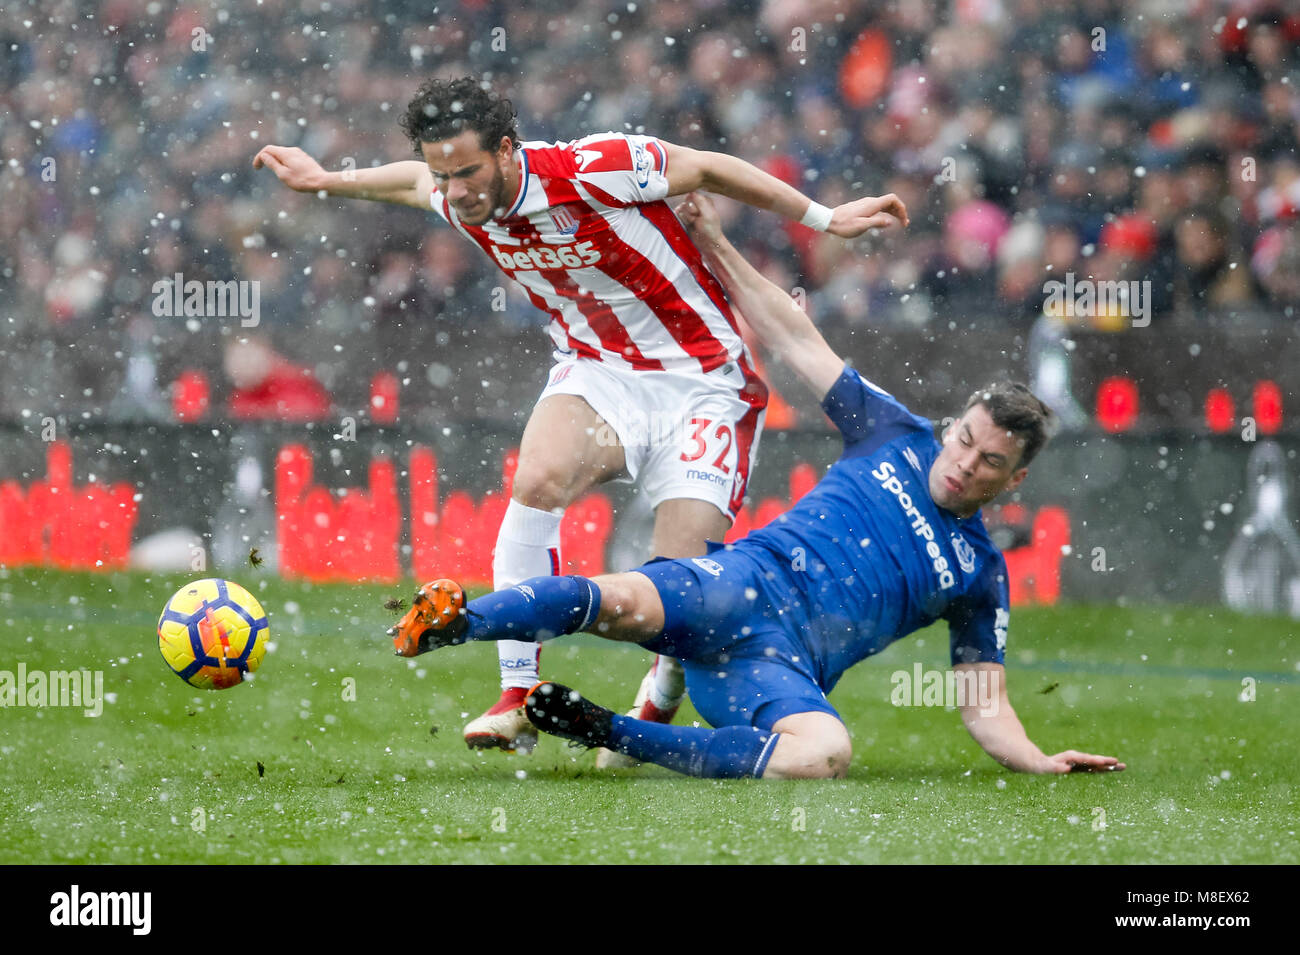 Stoke-on-Trent, UK, 17 Mar 2018. Ramadan Sobhi of Stoke City and Seamus Coleman of Everton during the Premier League match between Stoke City and Everton at Bet365 Stadium on March 17th 2018 in Stoke-on-Trent, England. (Photo by Daniel Chesterton/phcimages.com) Stock Photo